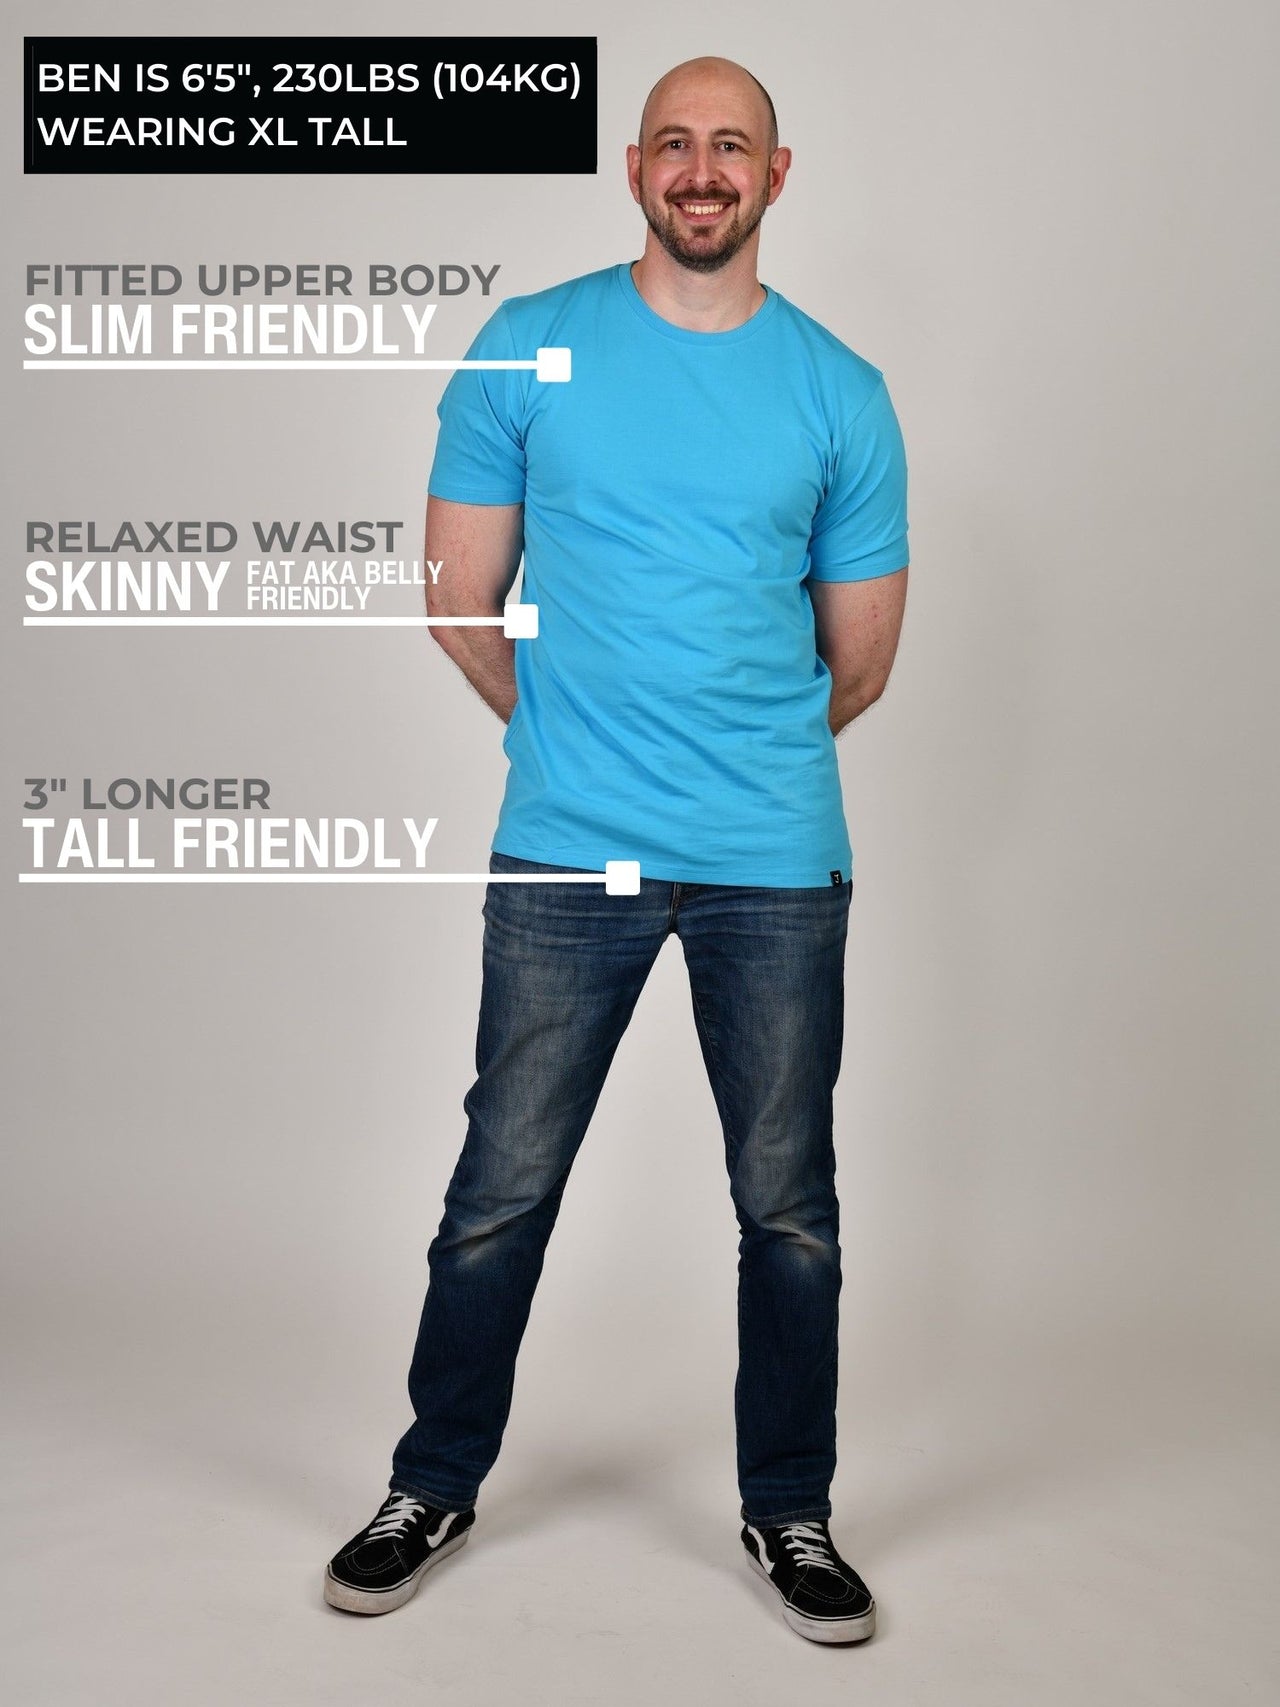 A head to toe shot of a tall athletic guy wearing a cyan XL tall t-shirt and smiling.